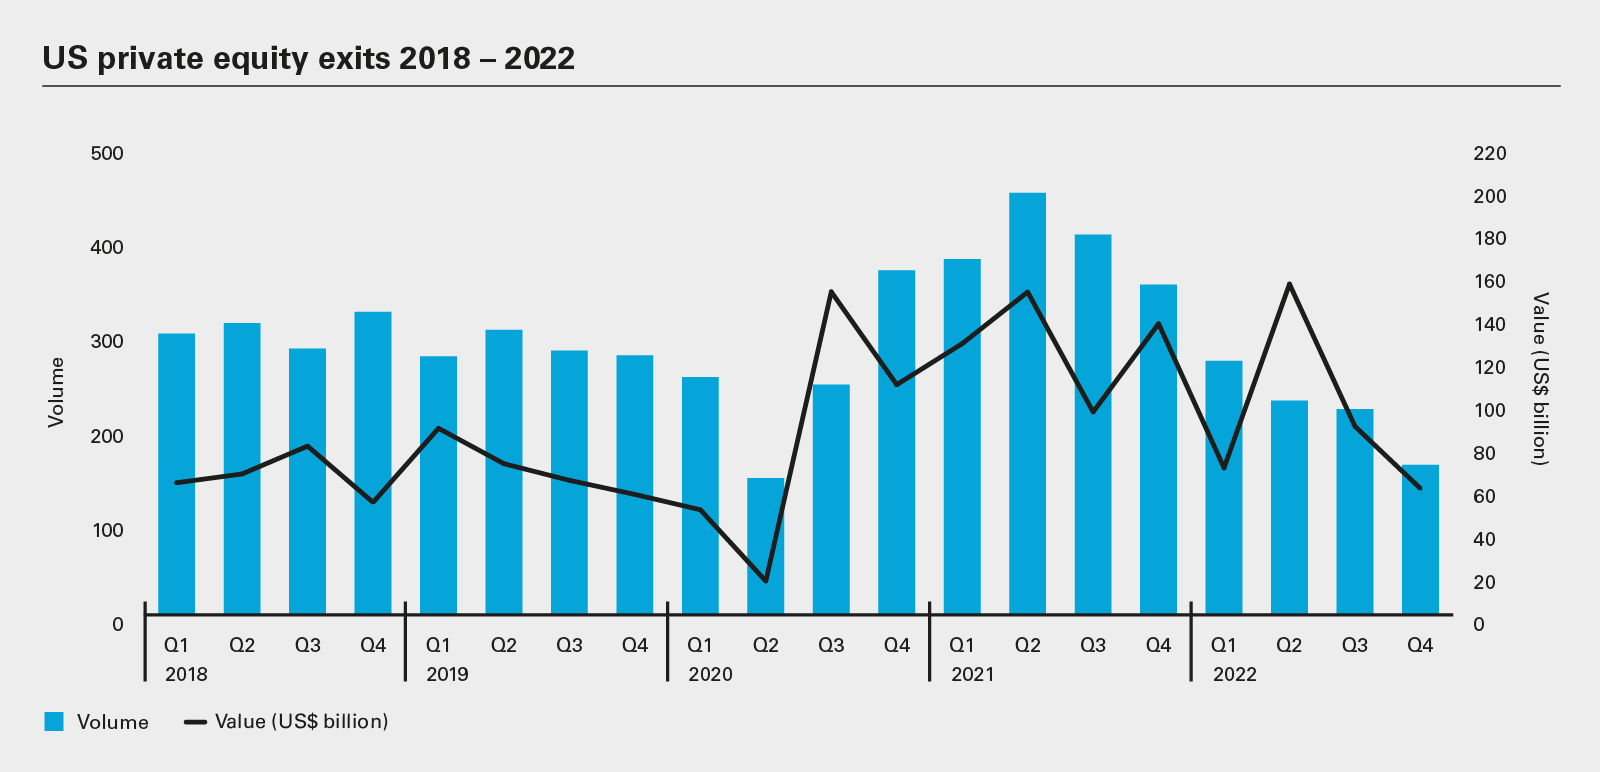 US private equity exits 2018 – 2022